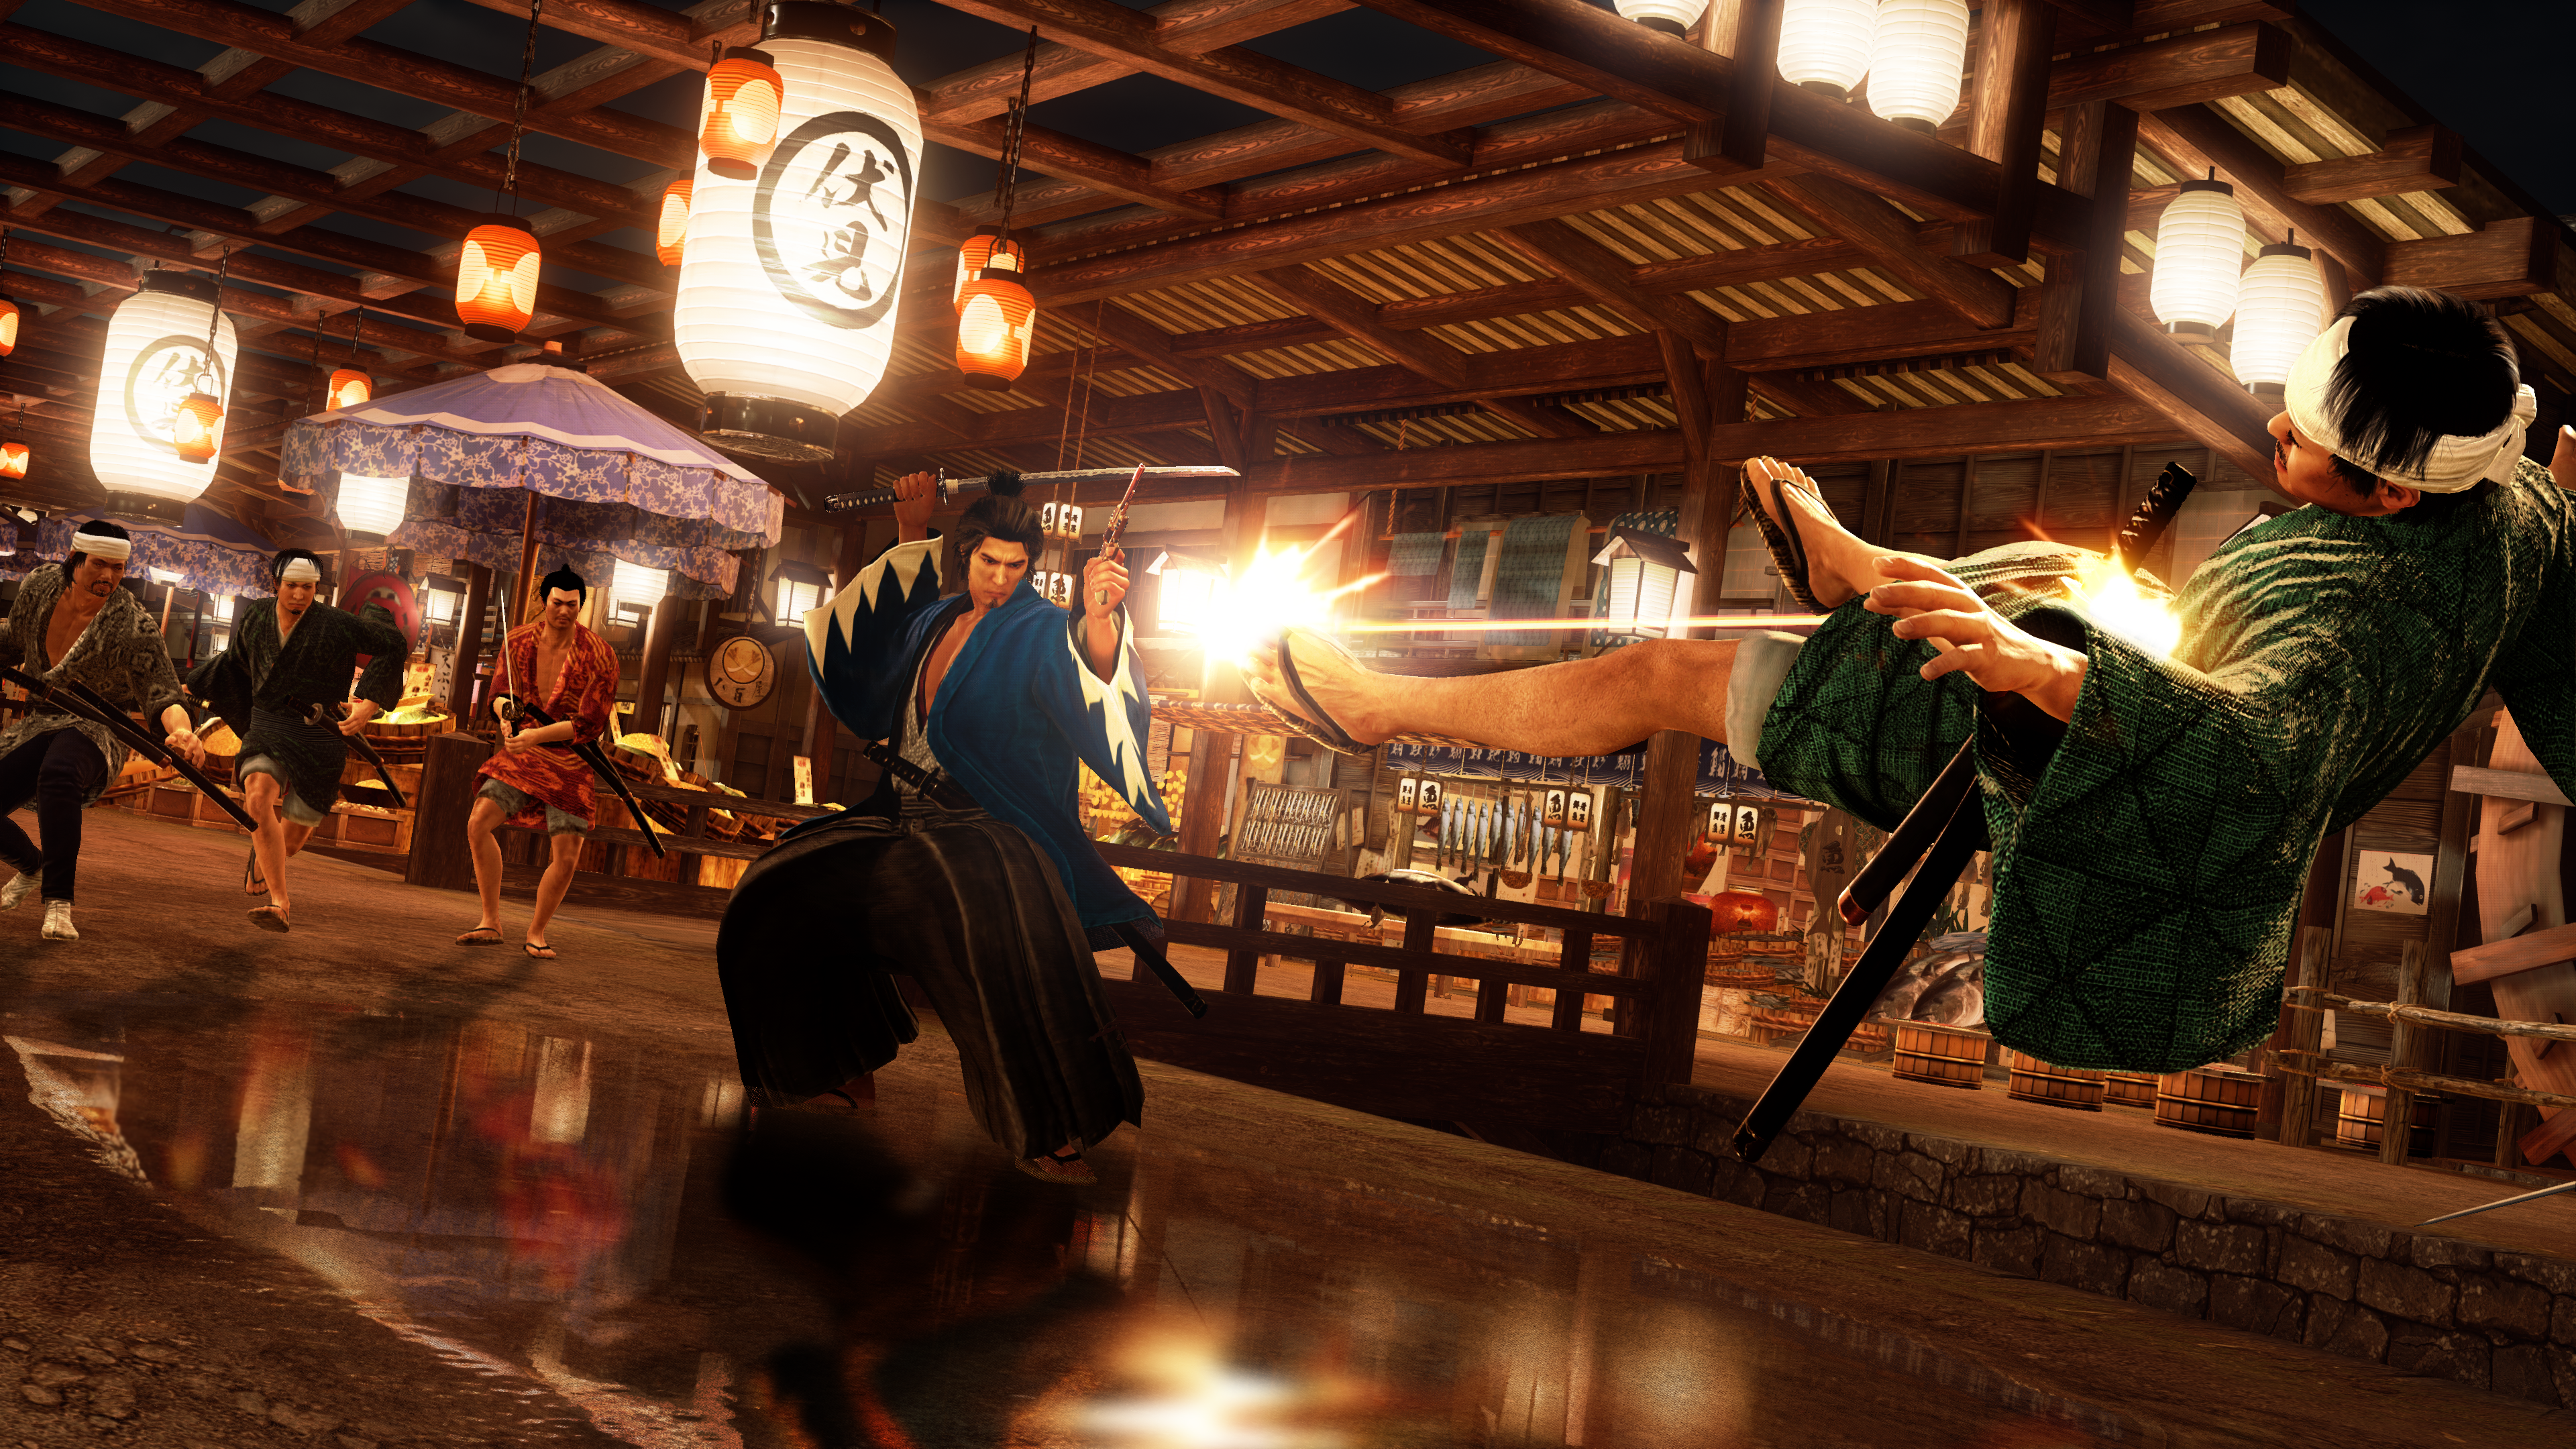 Ryoma is in the moddle of a market, next to a stream that runs through the middle. There are lanterns hanging from the ceiling illuminating the market. He is wearing his blue Shinsengumi robe. Behind him, 3 bandits are approaching, the left one in grey, the middle in black and the rightmost one in red. They are all brandishing swords. Ryoma is using the wild dancer style and has fired at shot at a bandit in front of him wearing green. The shot has sent the bandit flying backwards off of his feet.